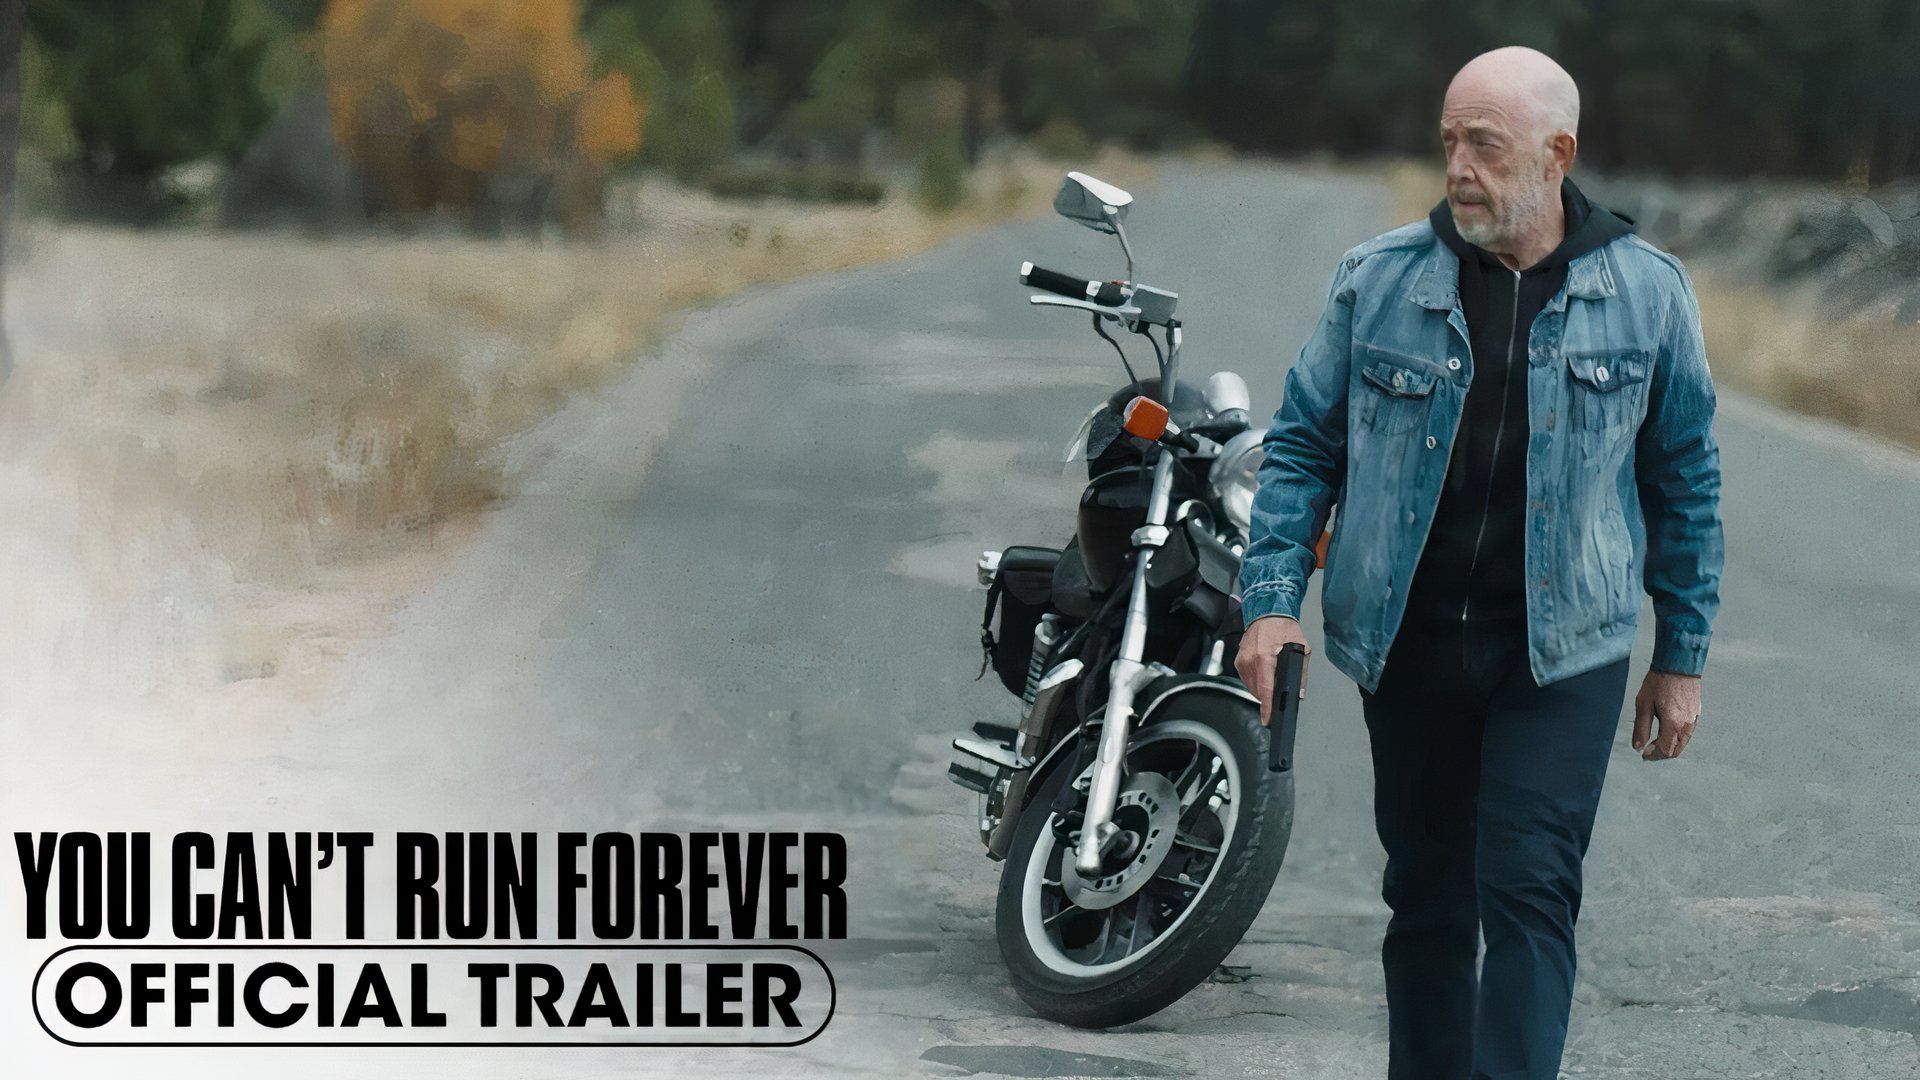 You Can't Run Forever trailer thumbnail